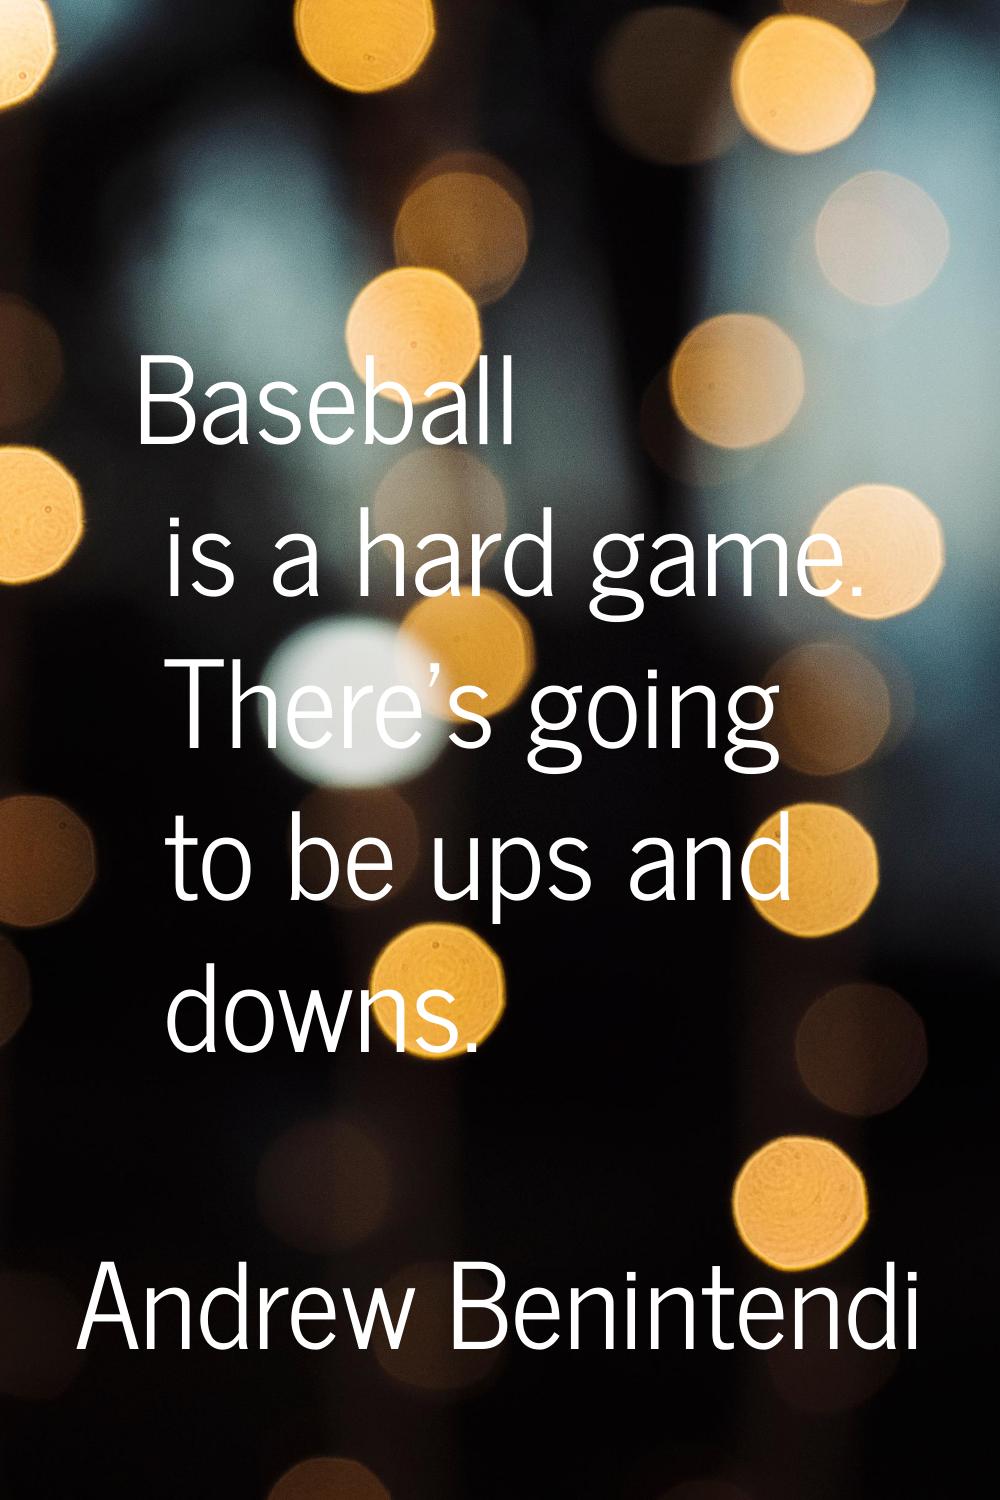 Baseball is a hard game. There's going to be ups and downs.